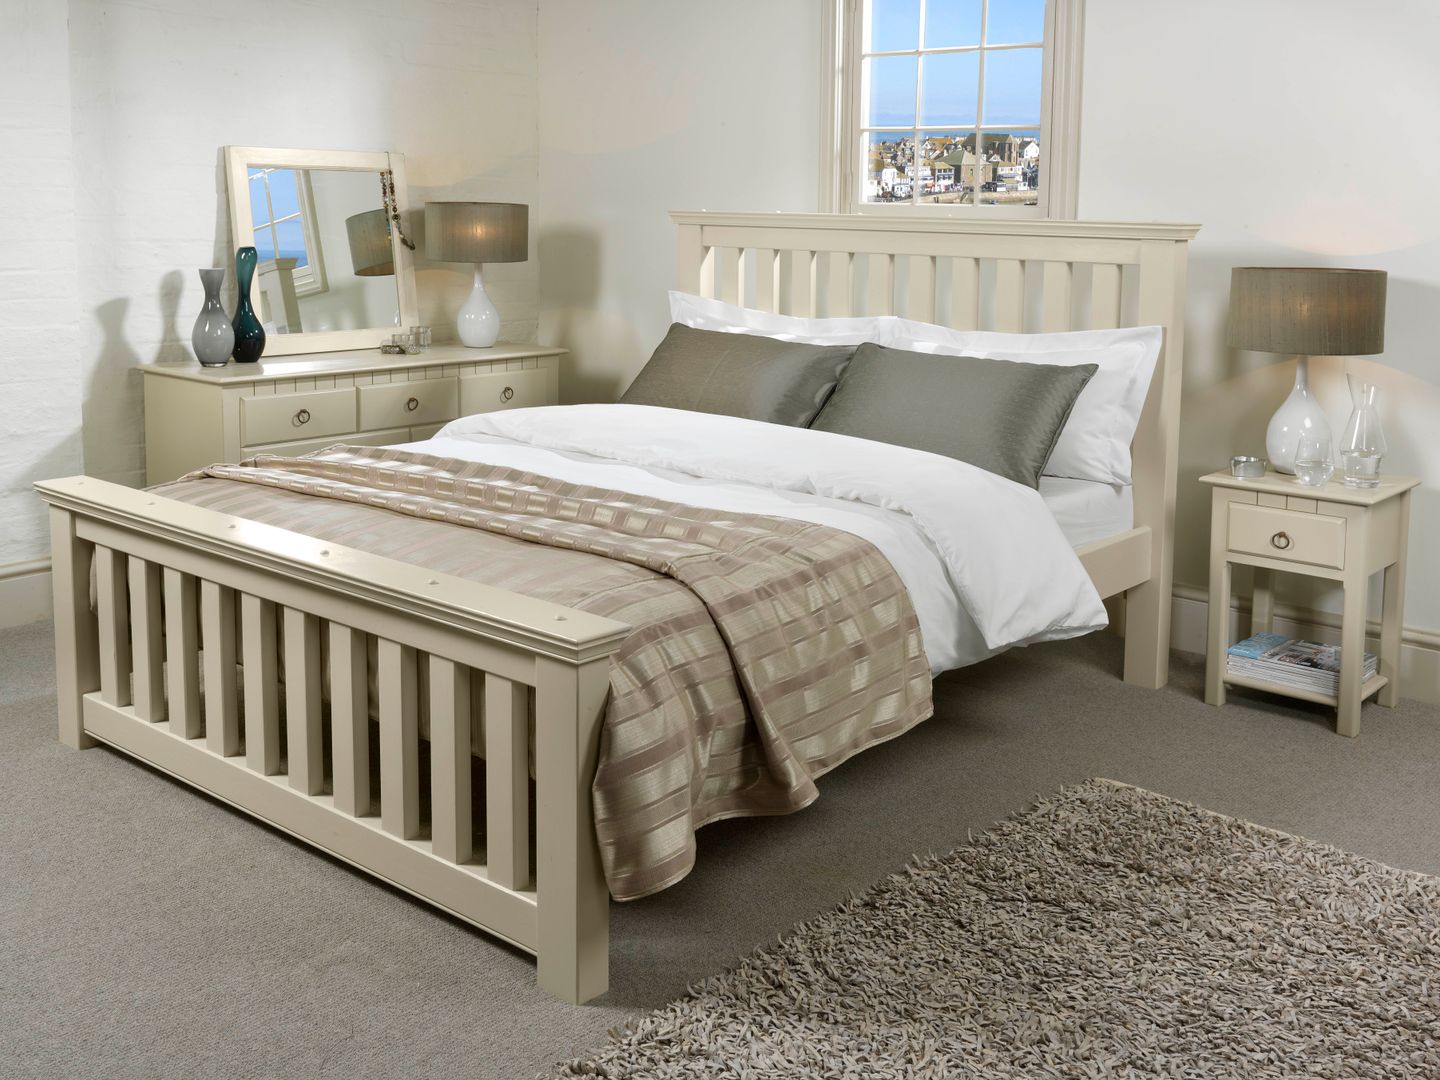 The Maine New England Bed Revival Beds Kamar Tidur Modern Beds & headboards